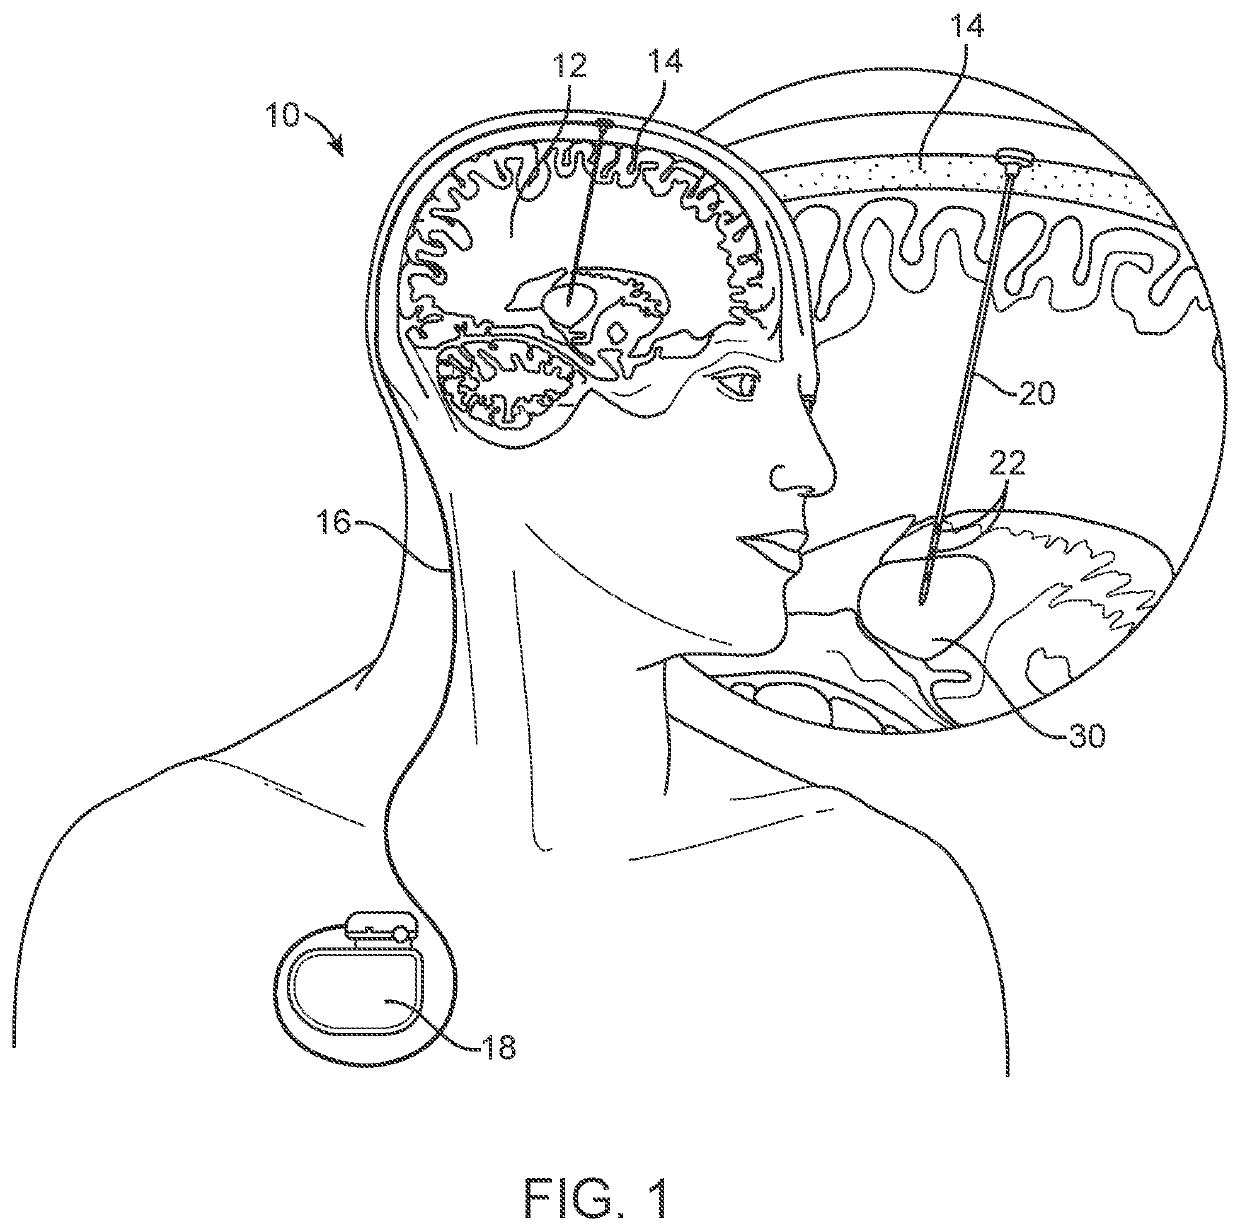 Systems and method for deep brain stimulation